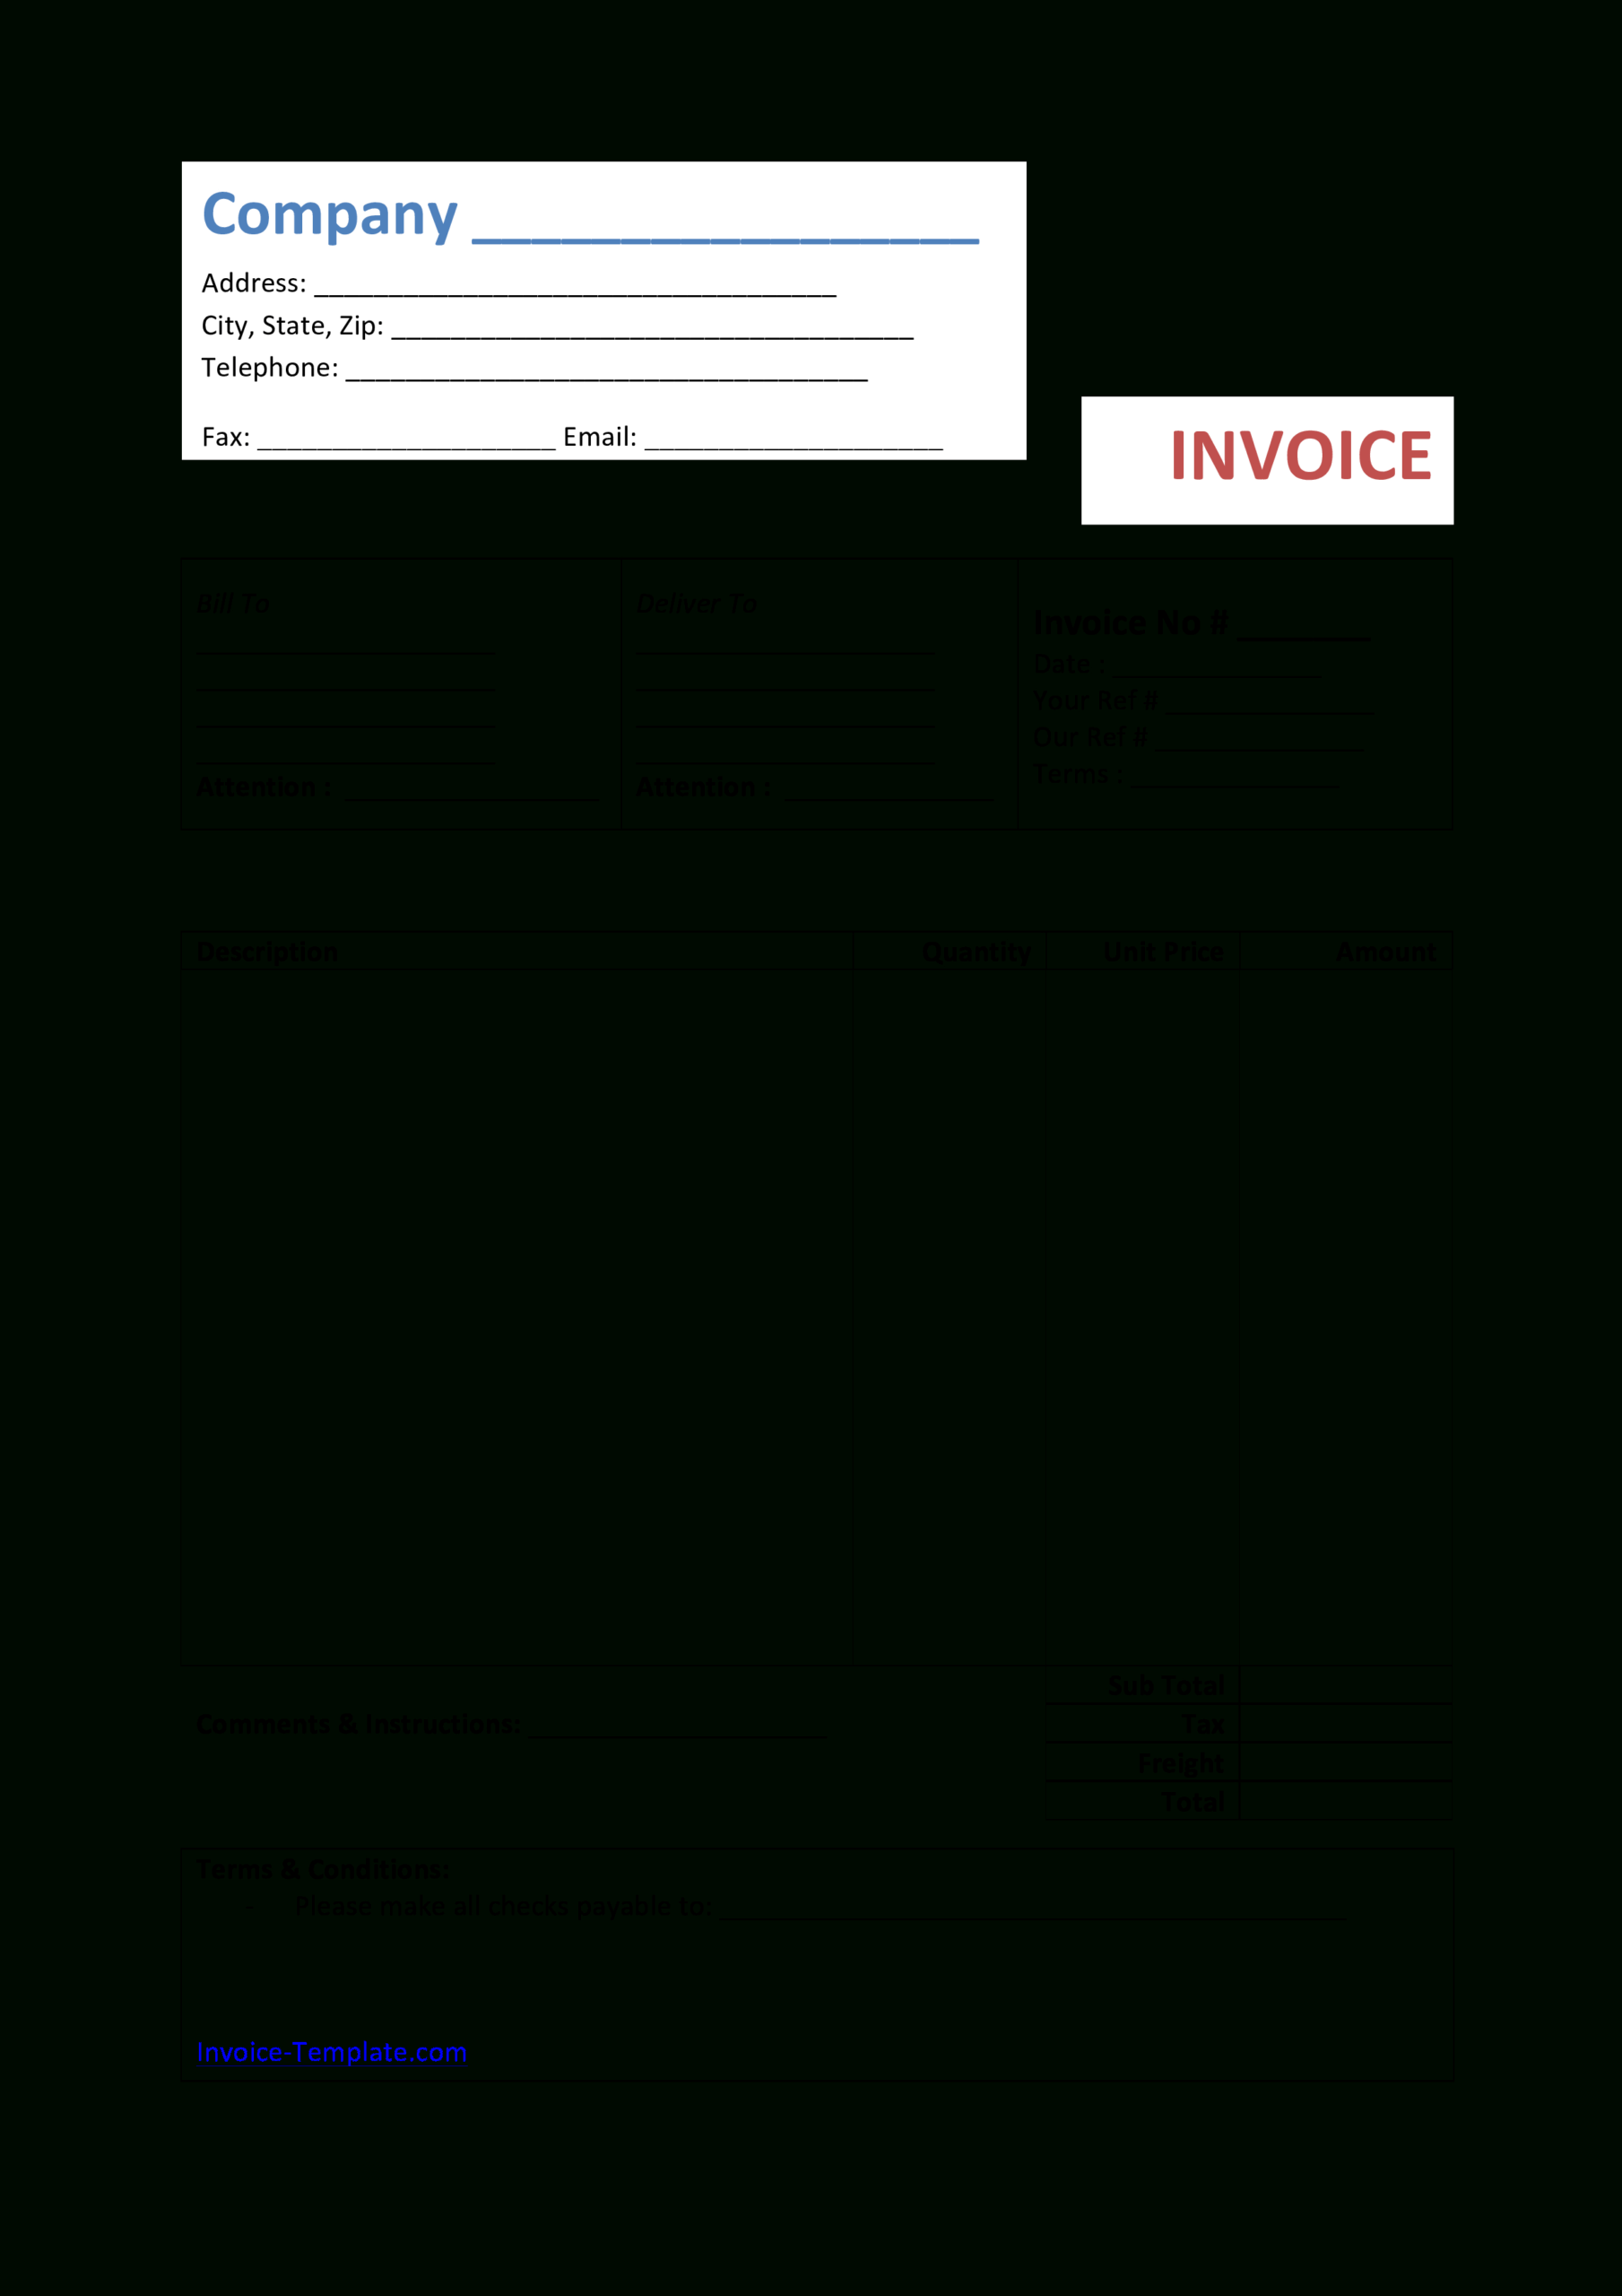 Simple Bakery Invoice | Templates At Allbusinesstemplates Inside Bakery Invoice Template